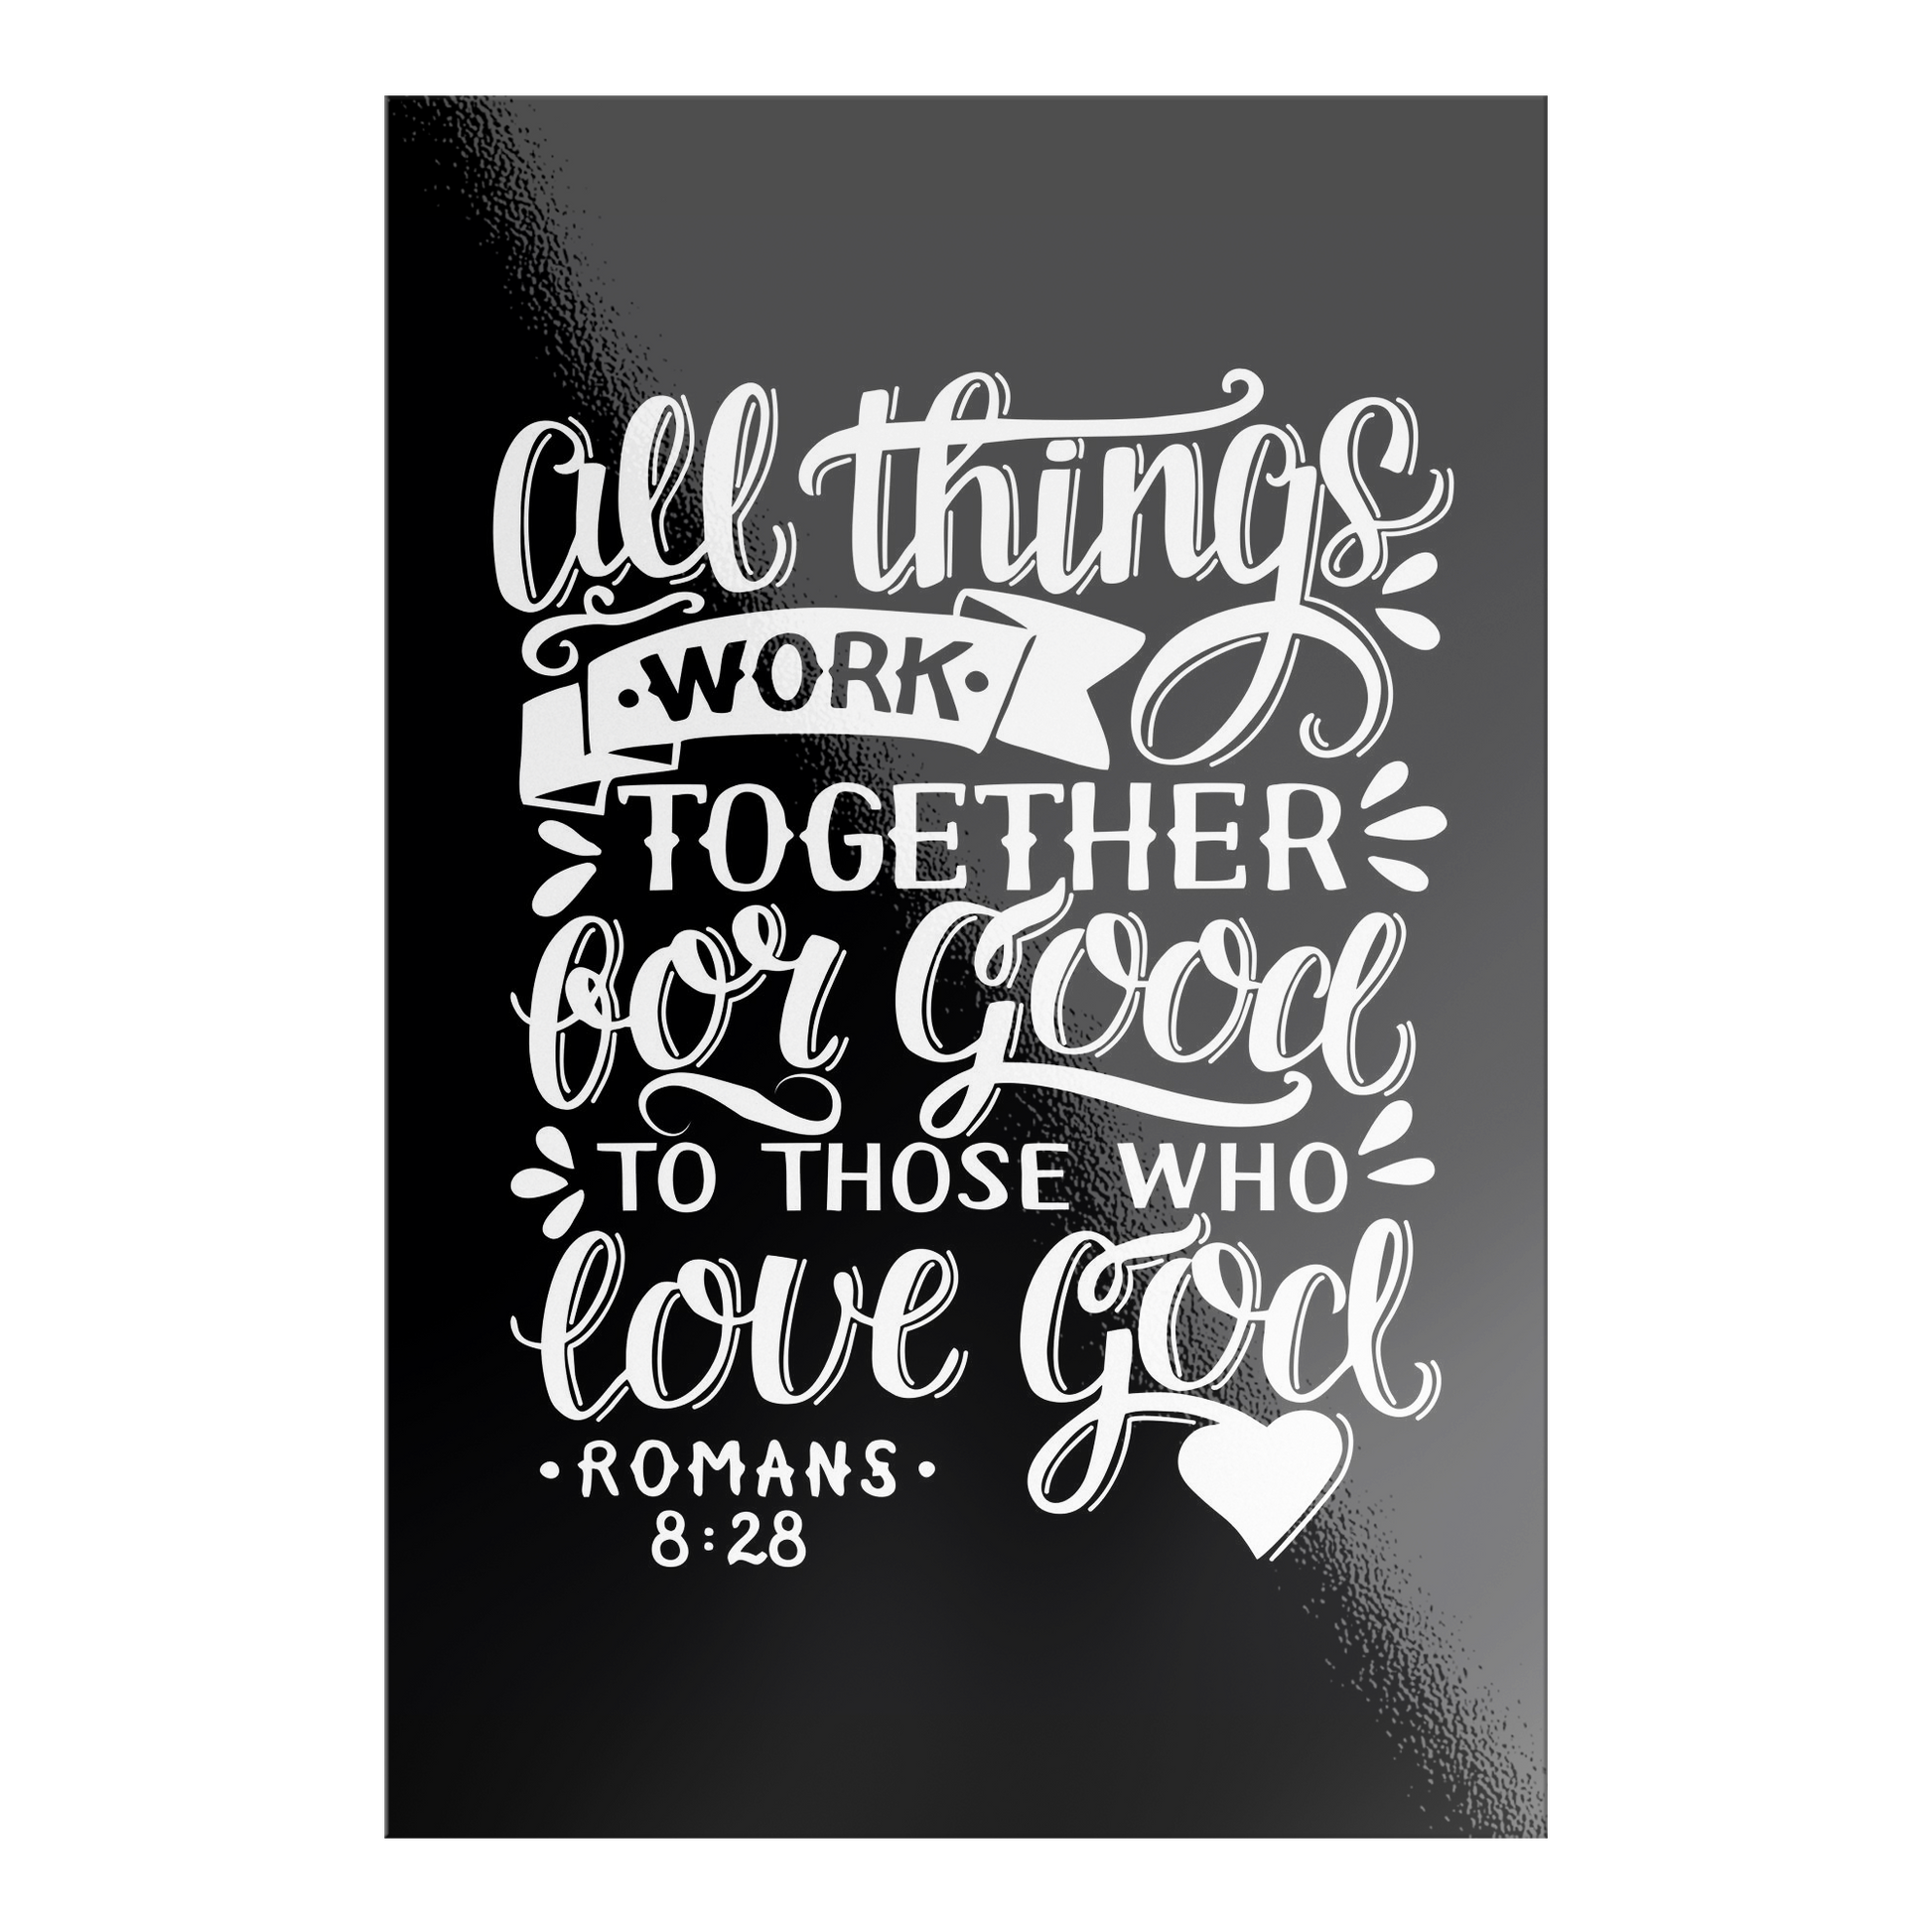 All Things Work Together For Good To Those Who Love God, Romans 8:28 - White on Black Rectangle Sticker